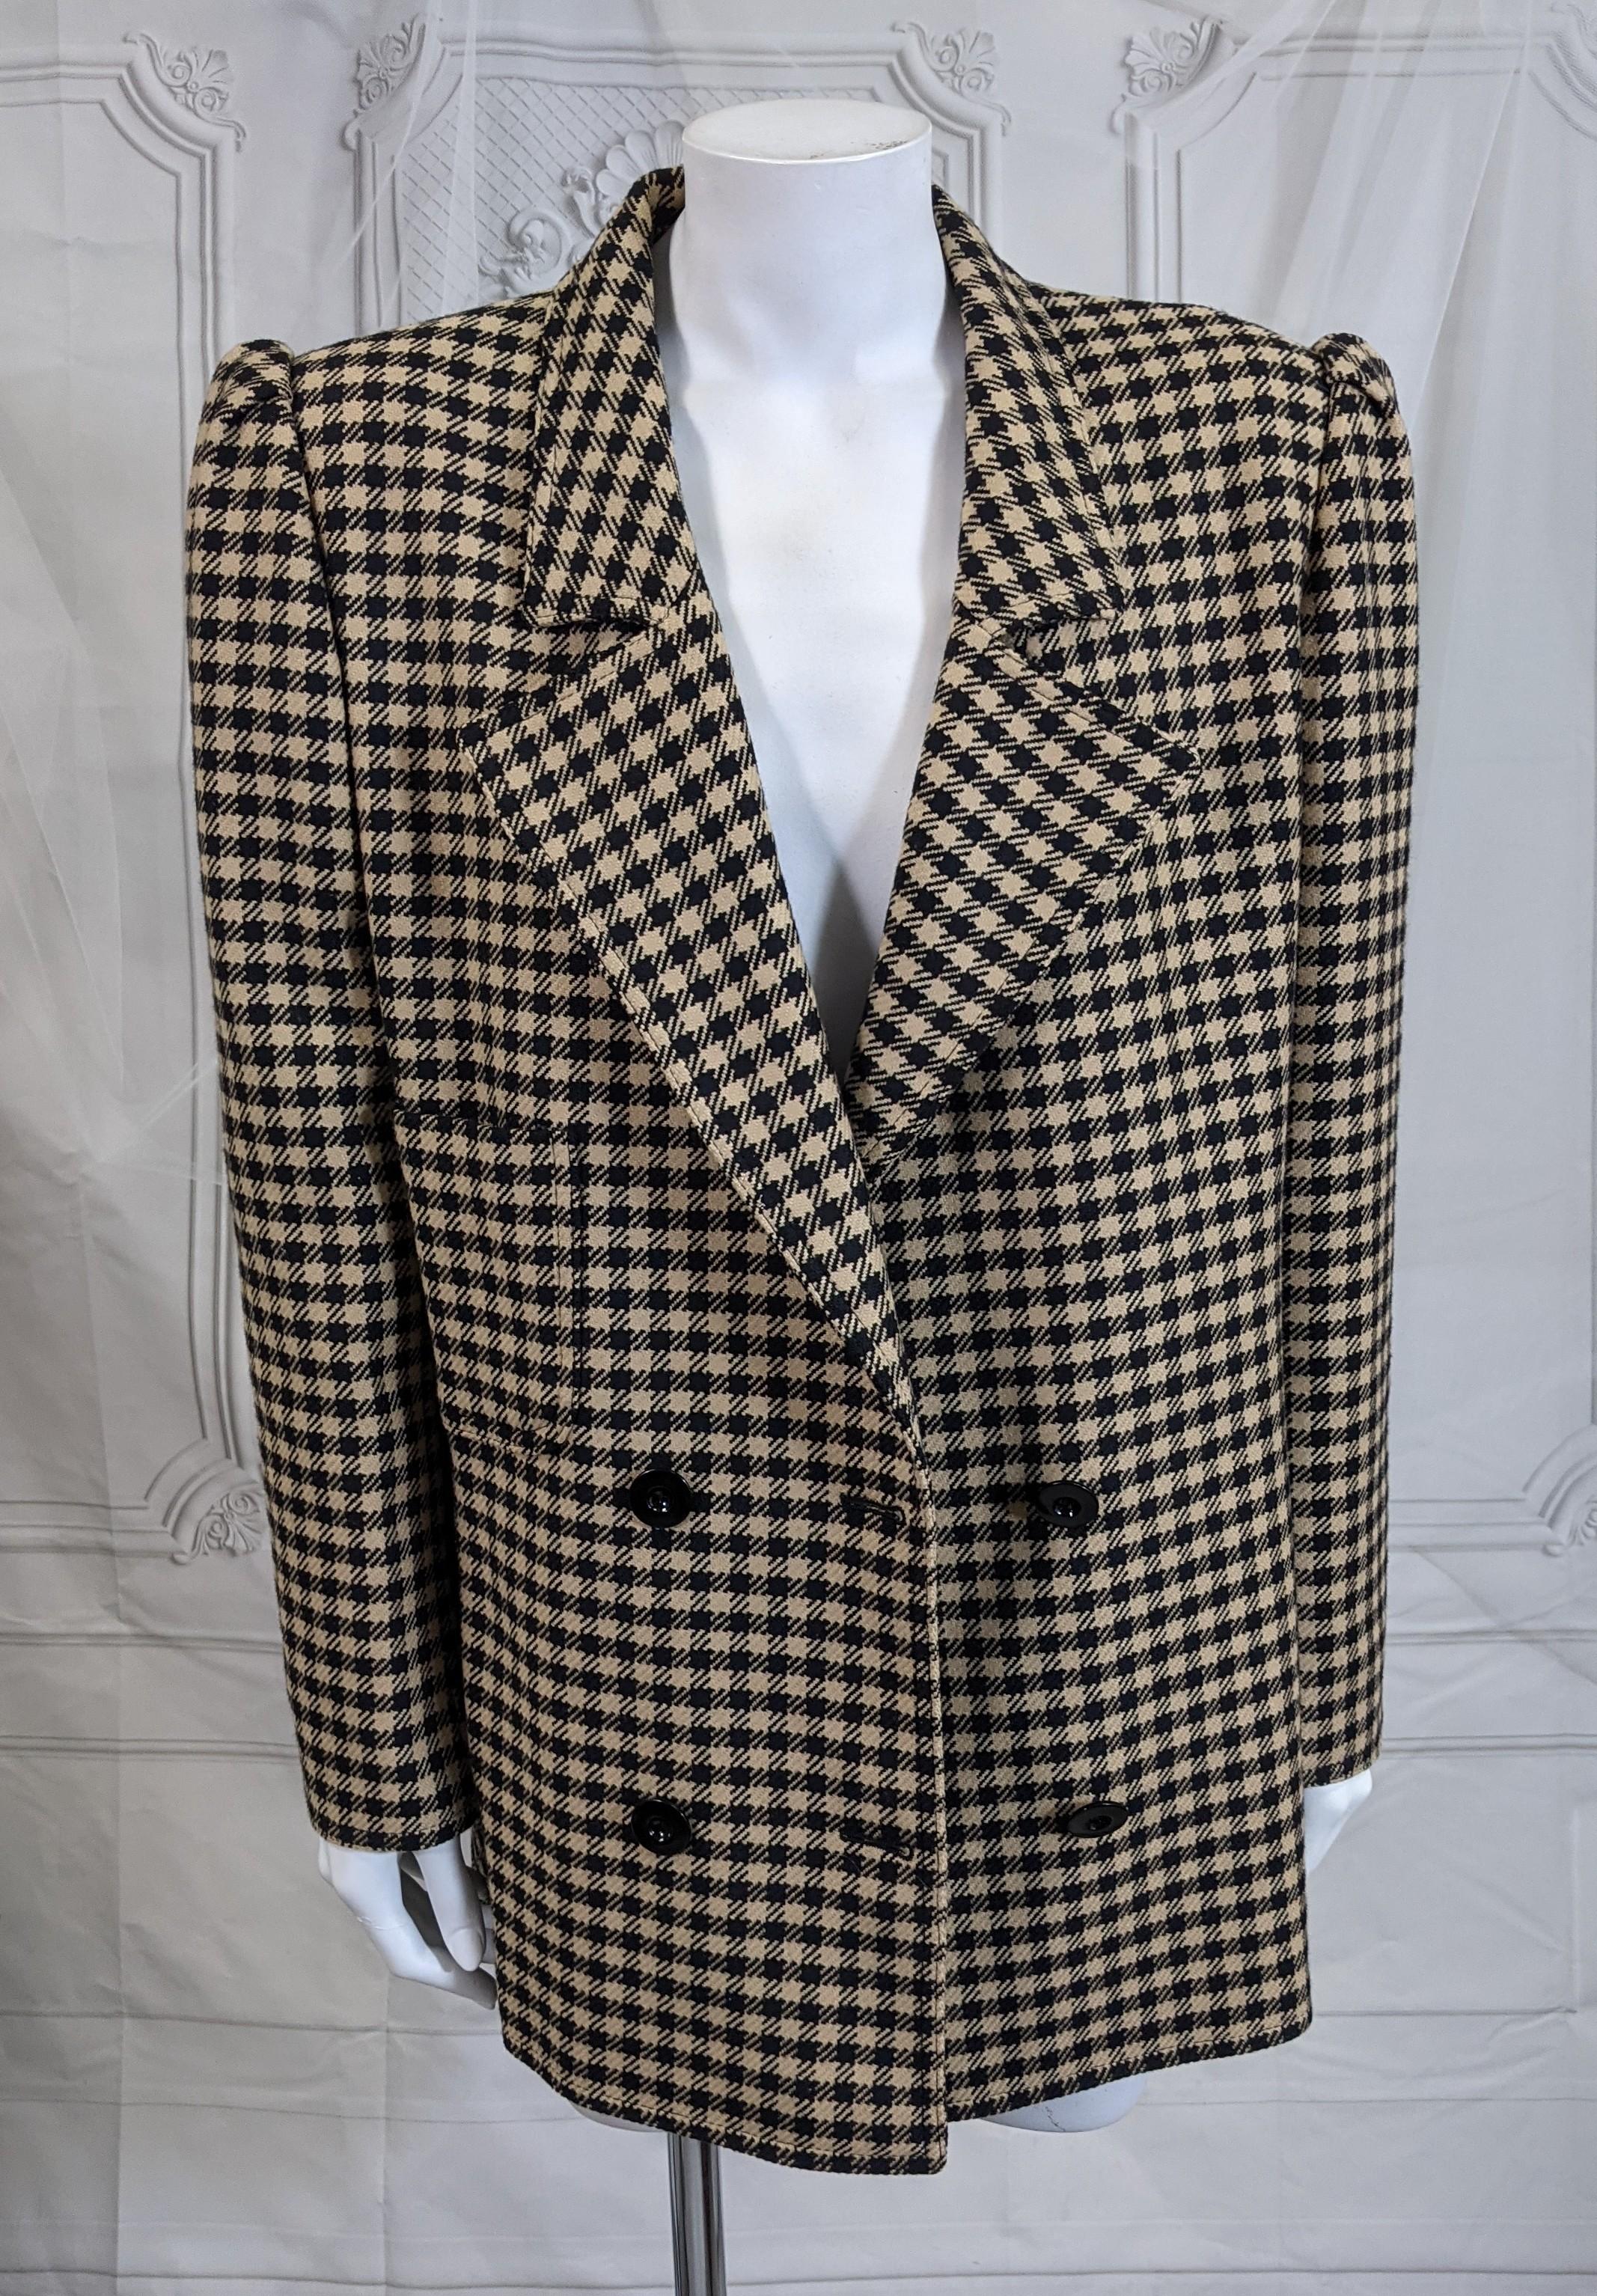 Valentino Houndstooth Blazer In Excellent Condition For Sale In New York, NY